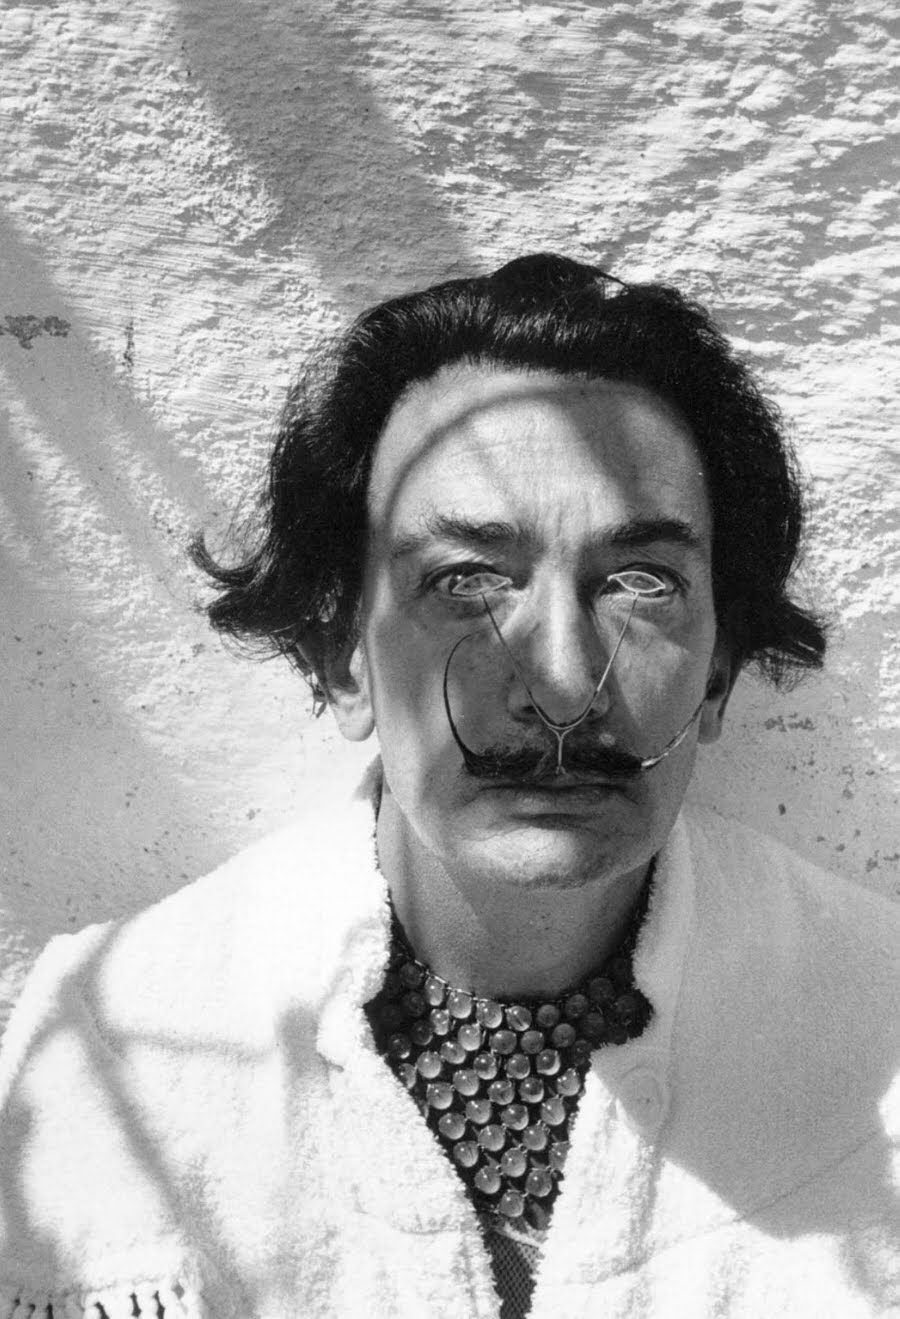 Dalí shows off some customized spectacles.